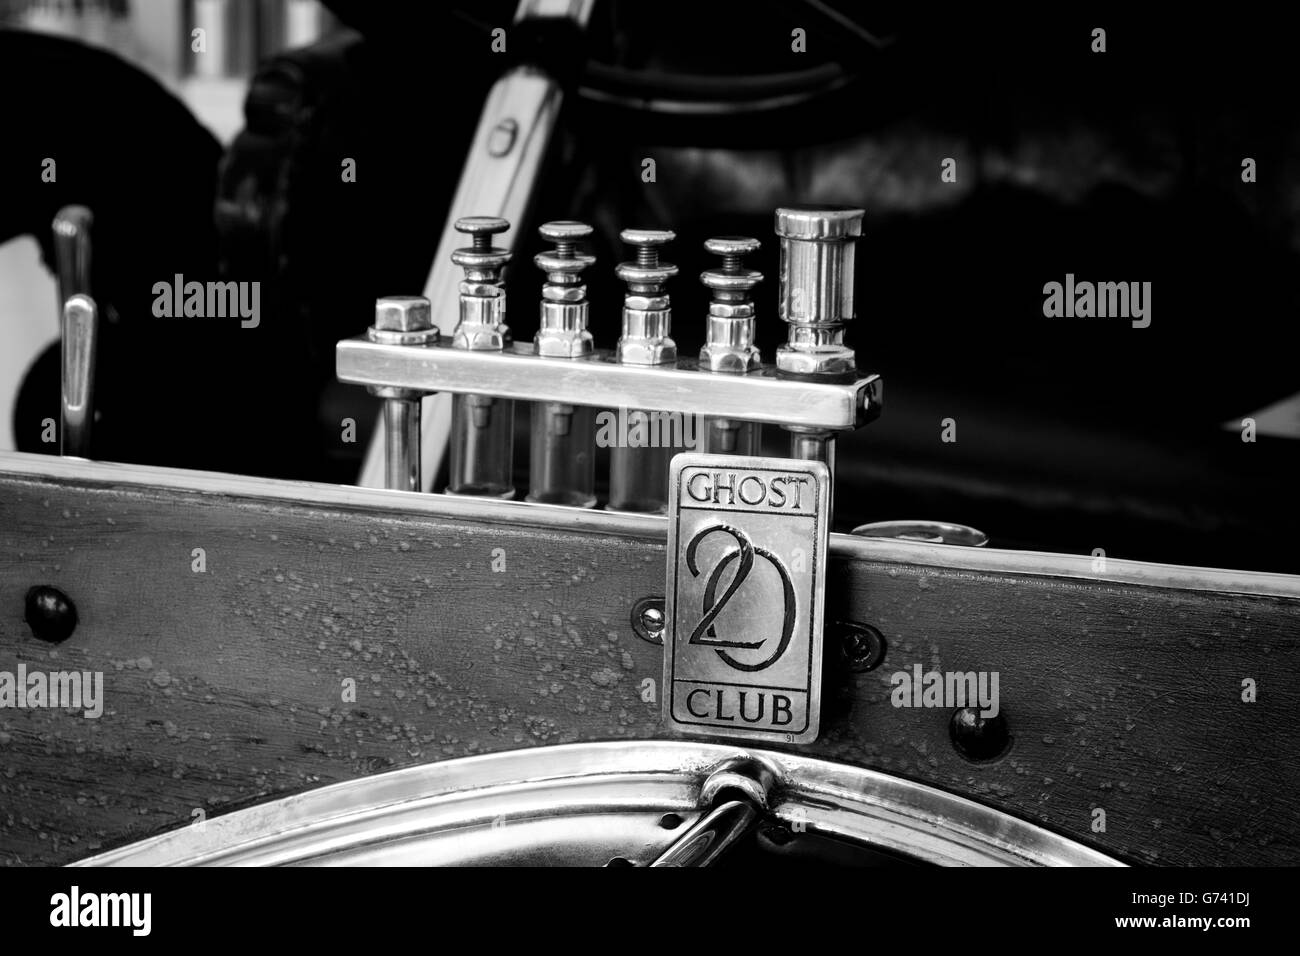 Details from the front of a vintage Rolls Royce featuring the Rolls Royce Ghost 20 Club Stock Photo